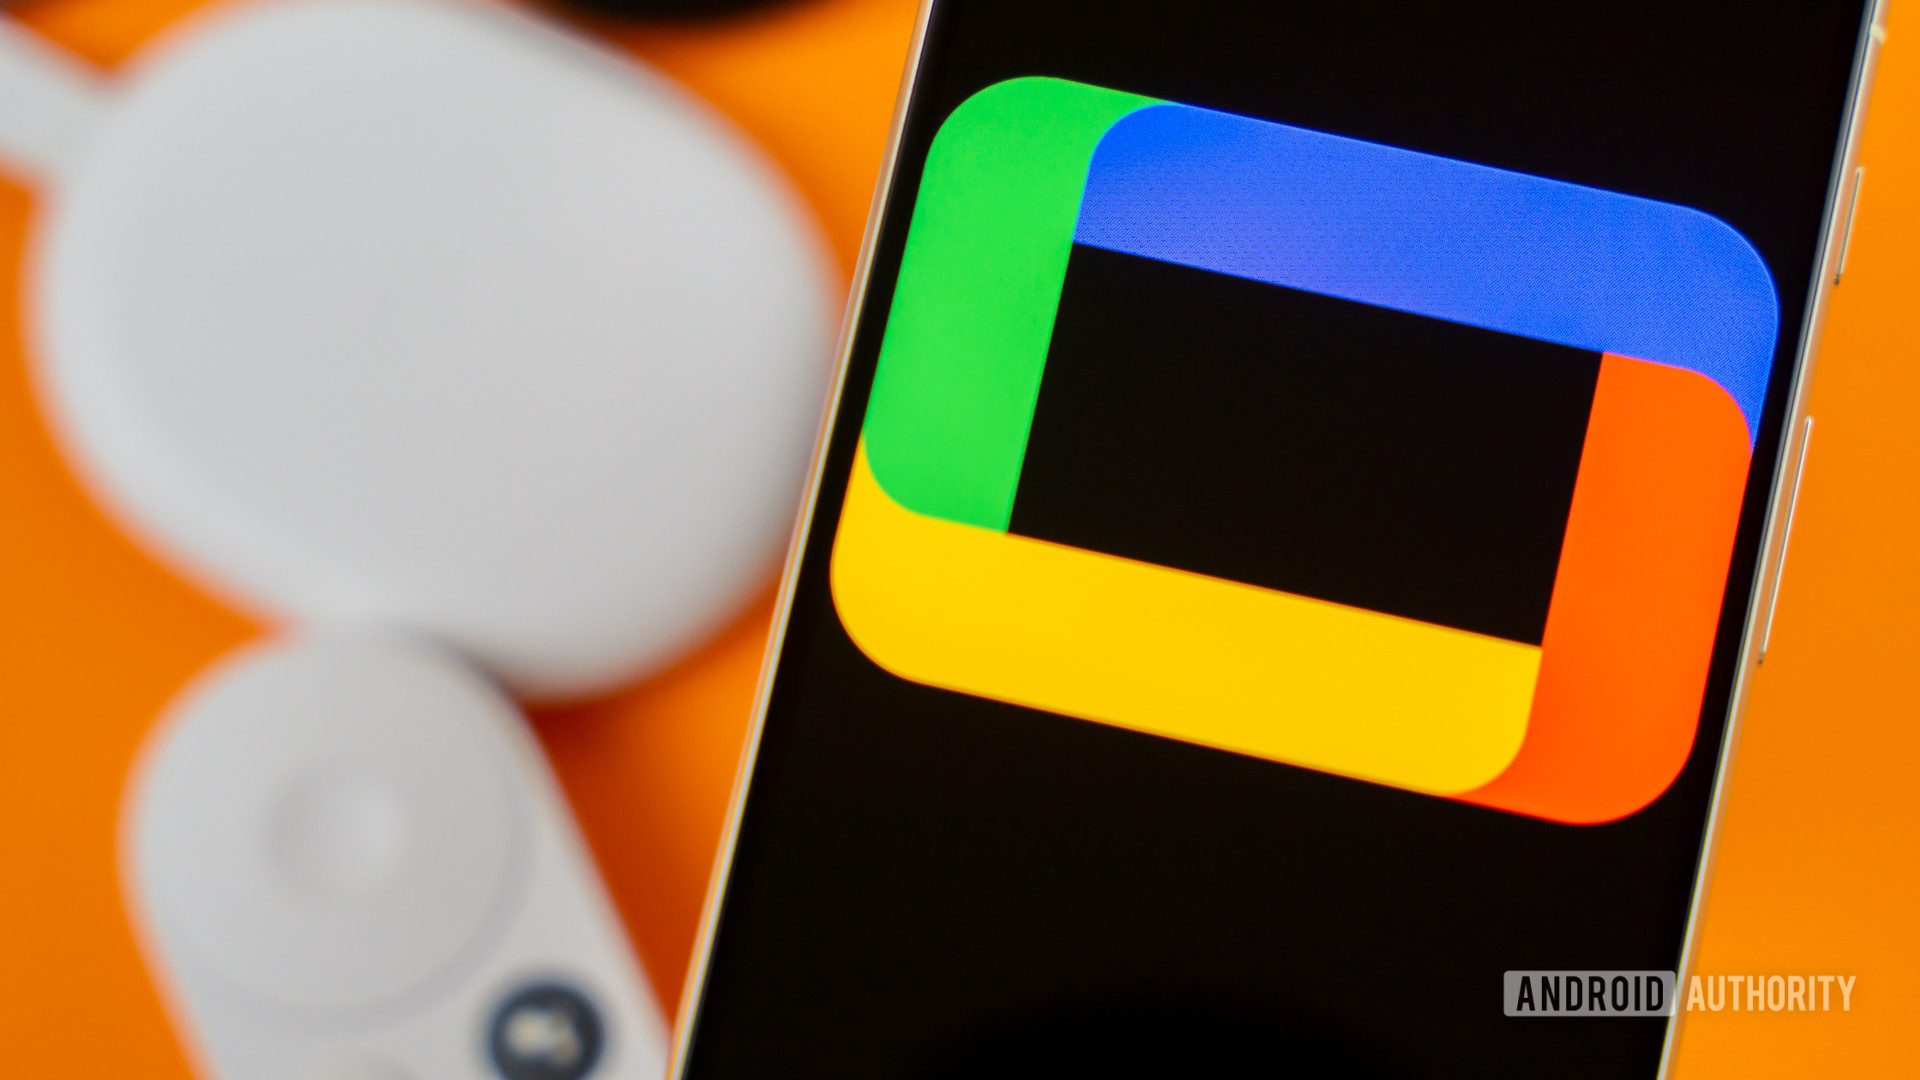 Google TV logo on smartphone next to Chromecast devices and remote Stock photo 2